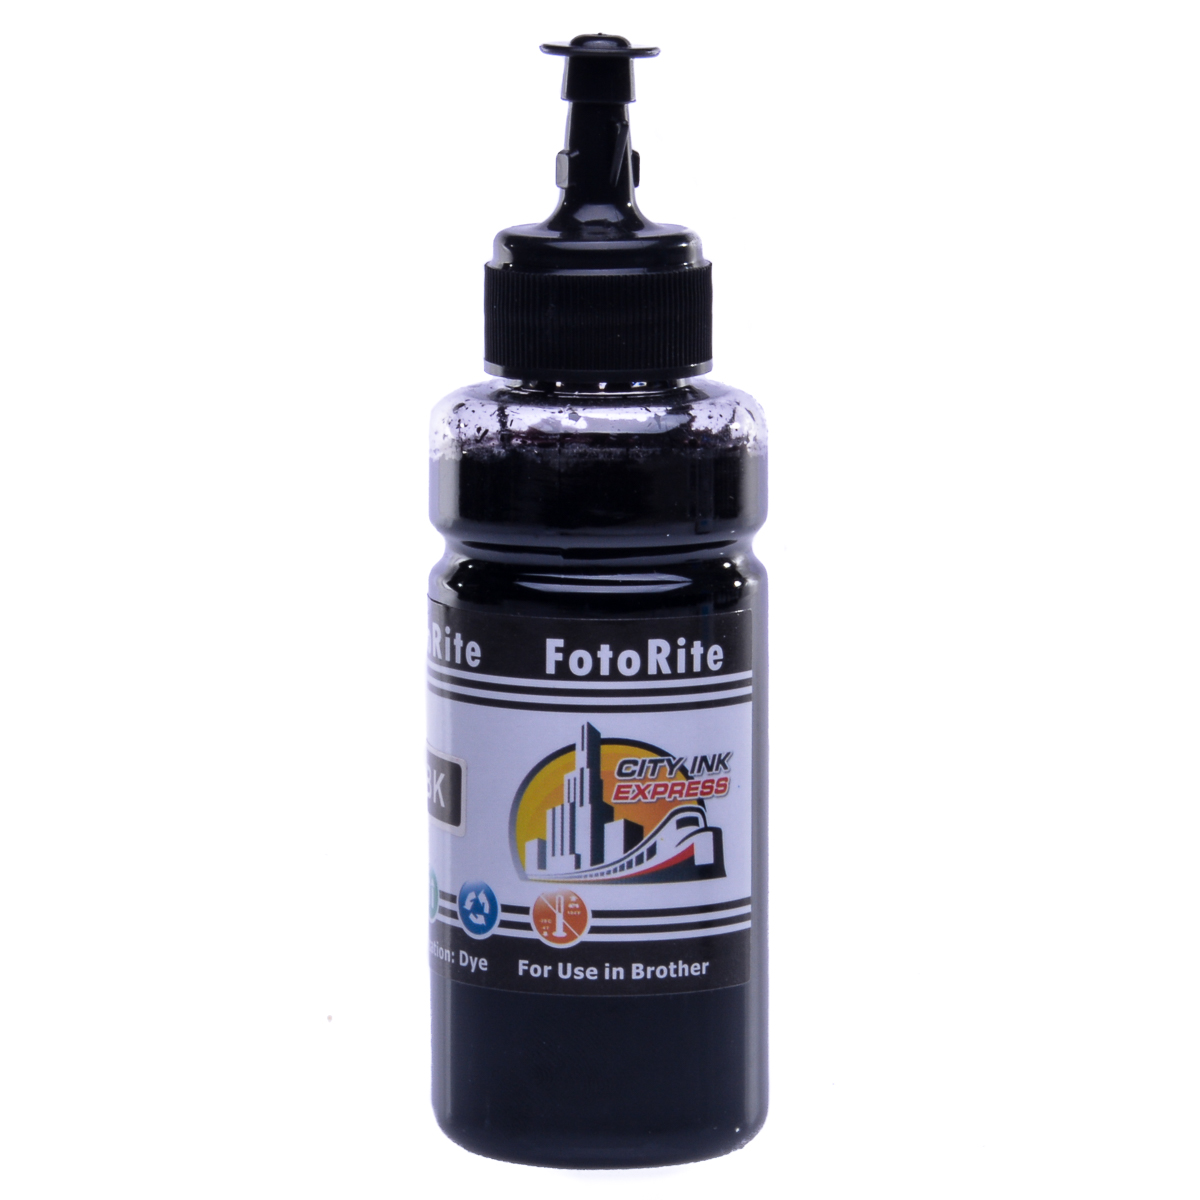 Cheap Black dye ink replaces Brother MFC-J410 - LC985BK